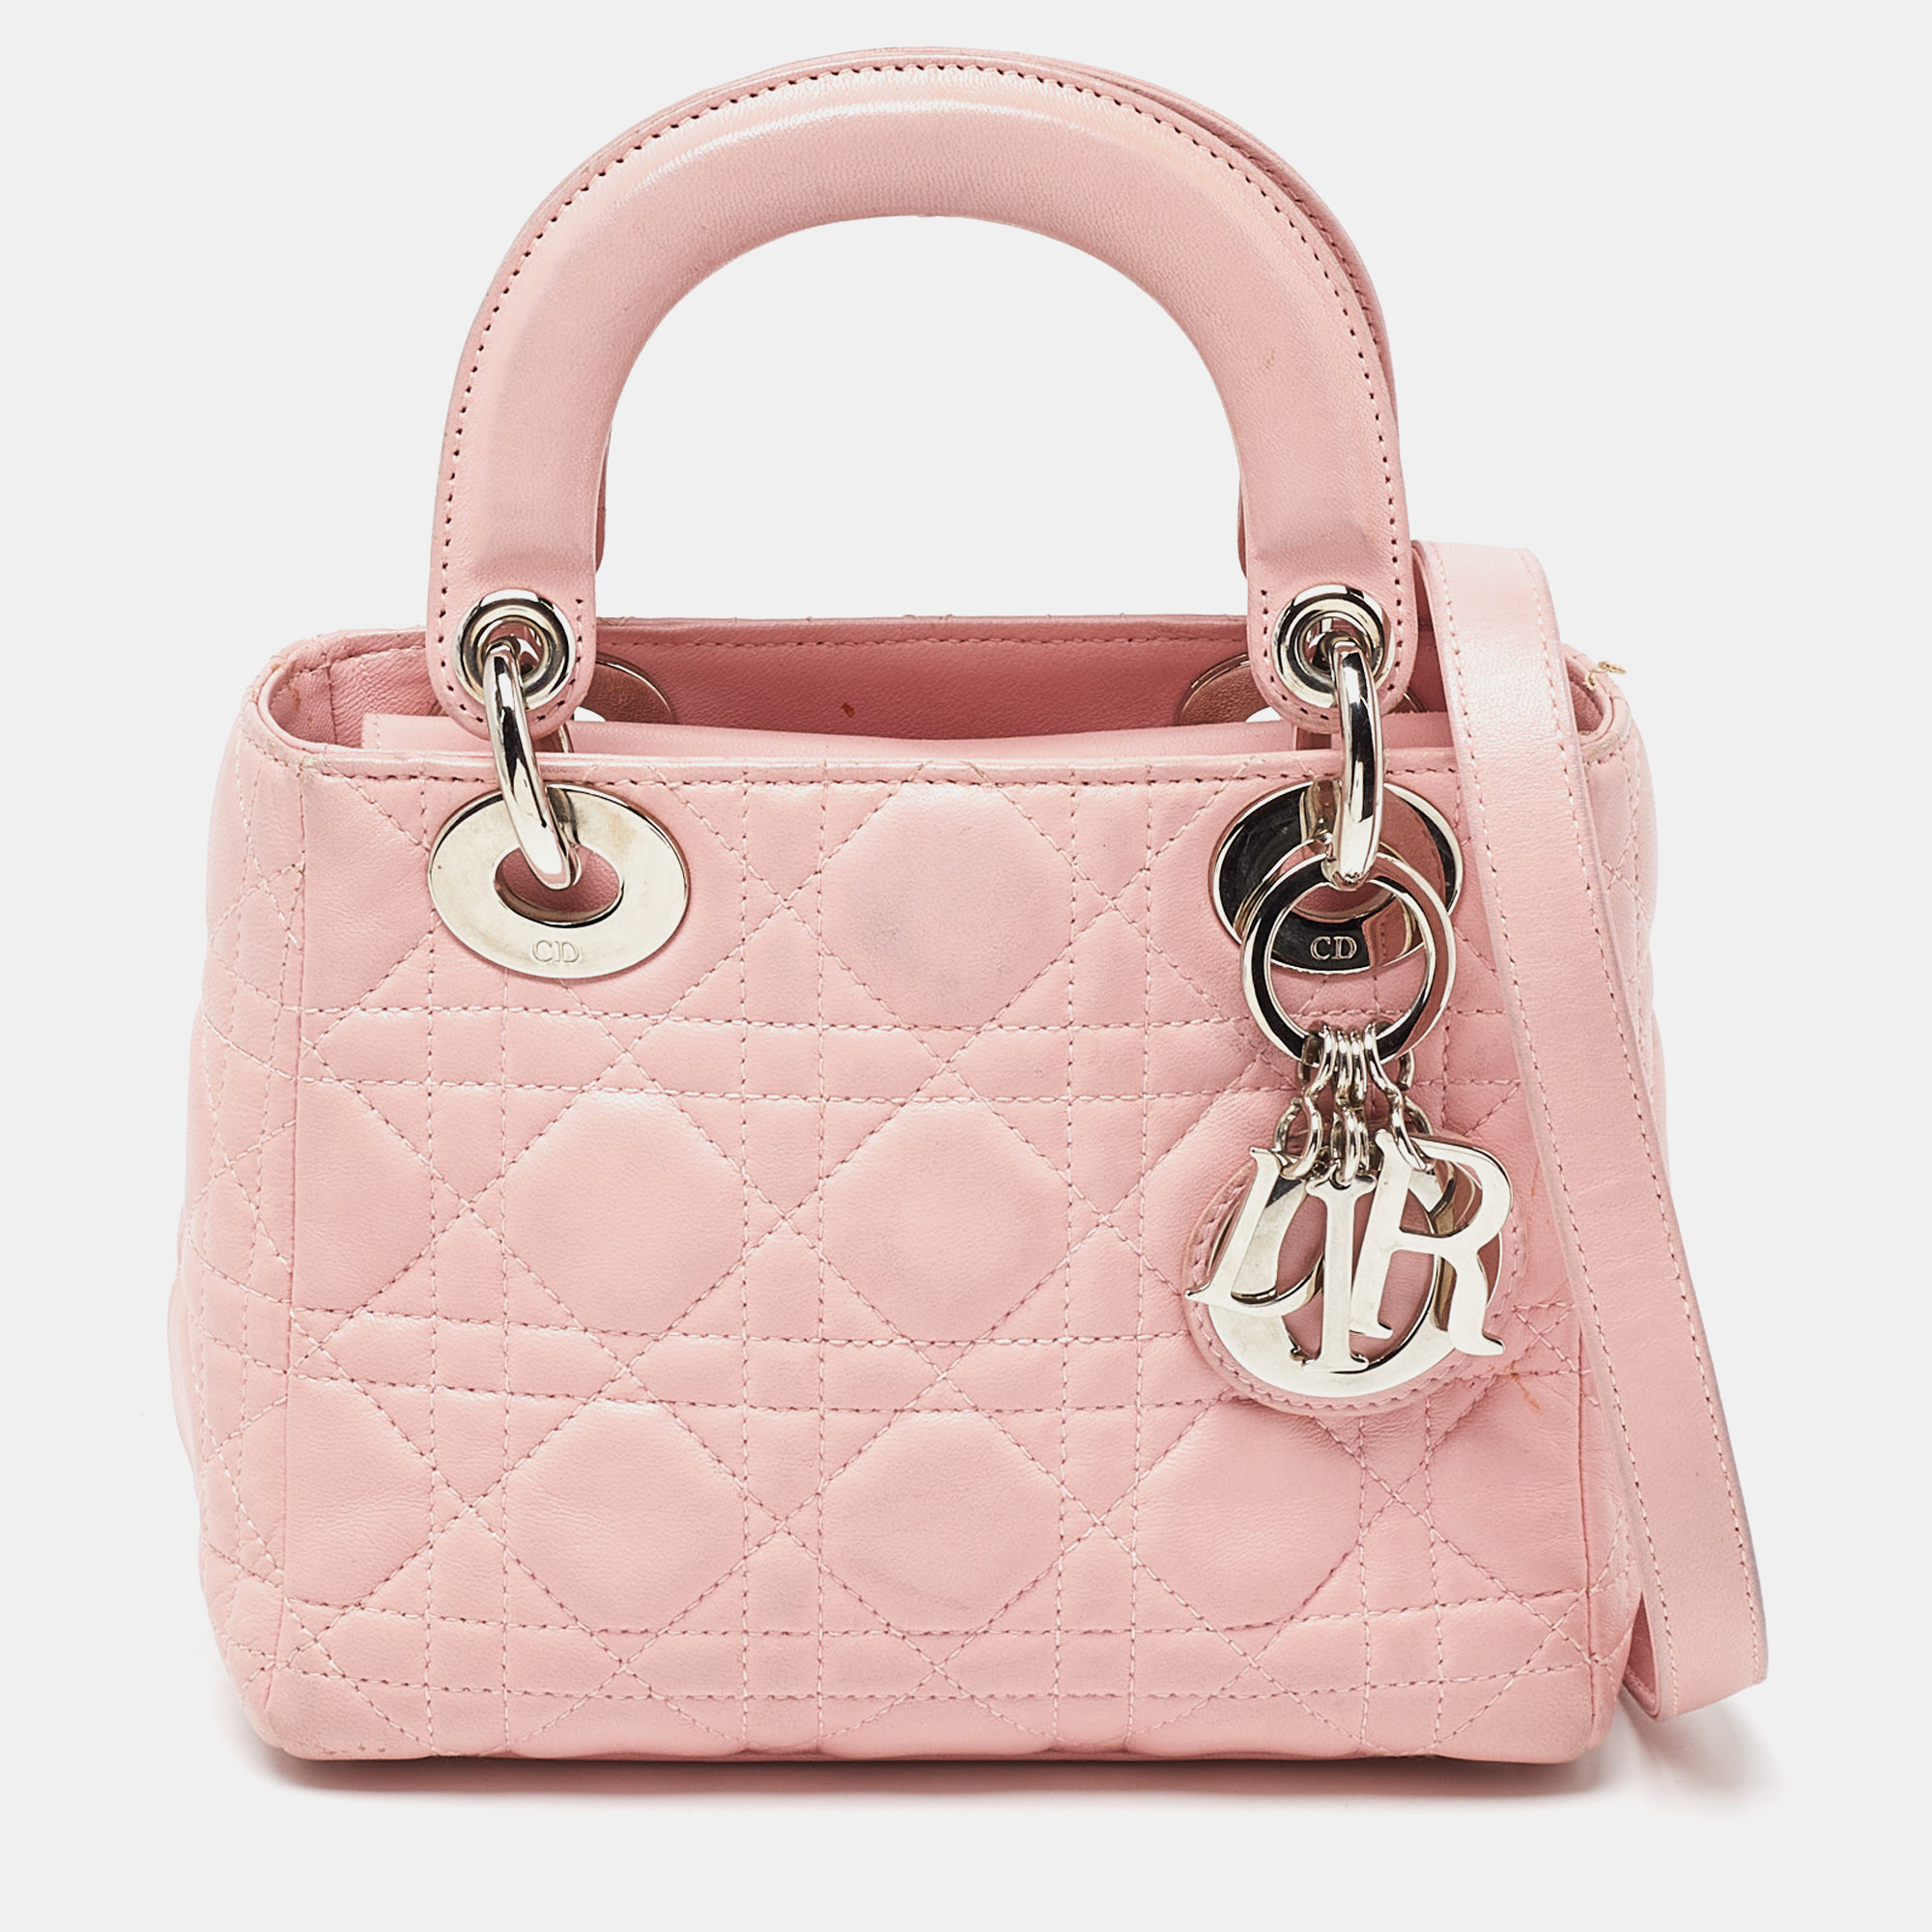 Dior pink cannage leather mini lady dior tote